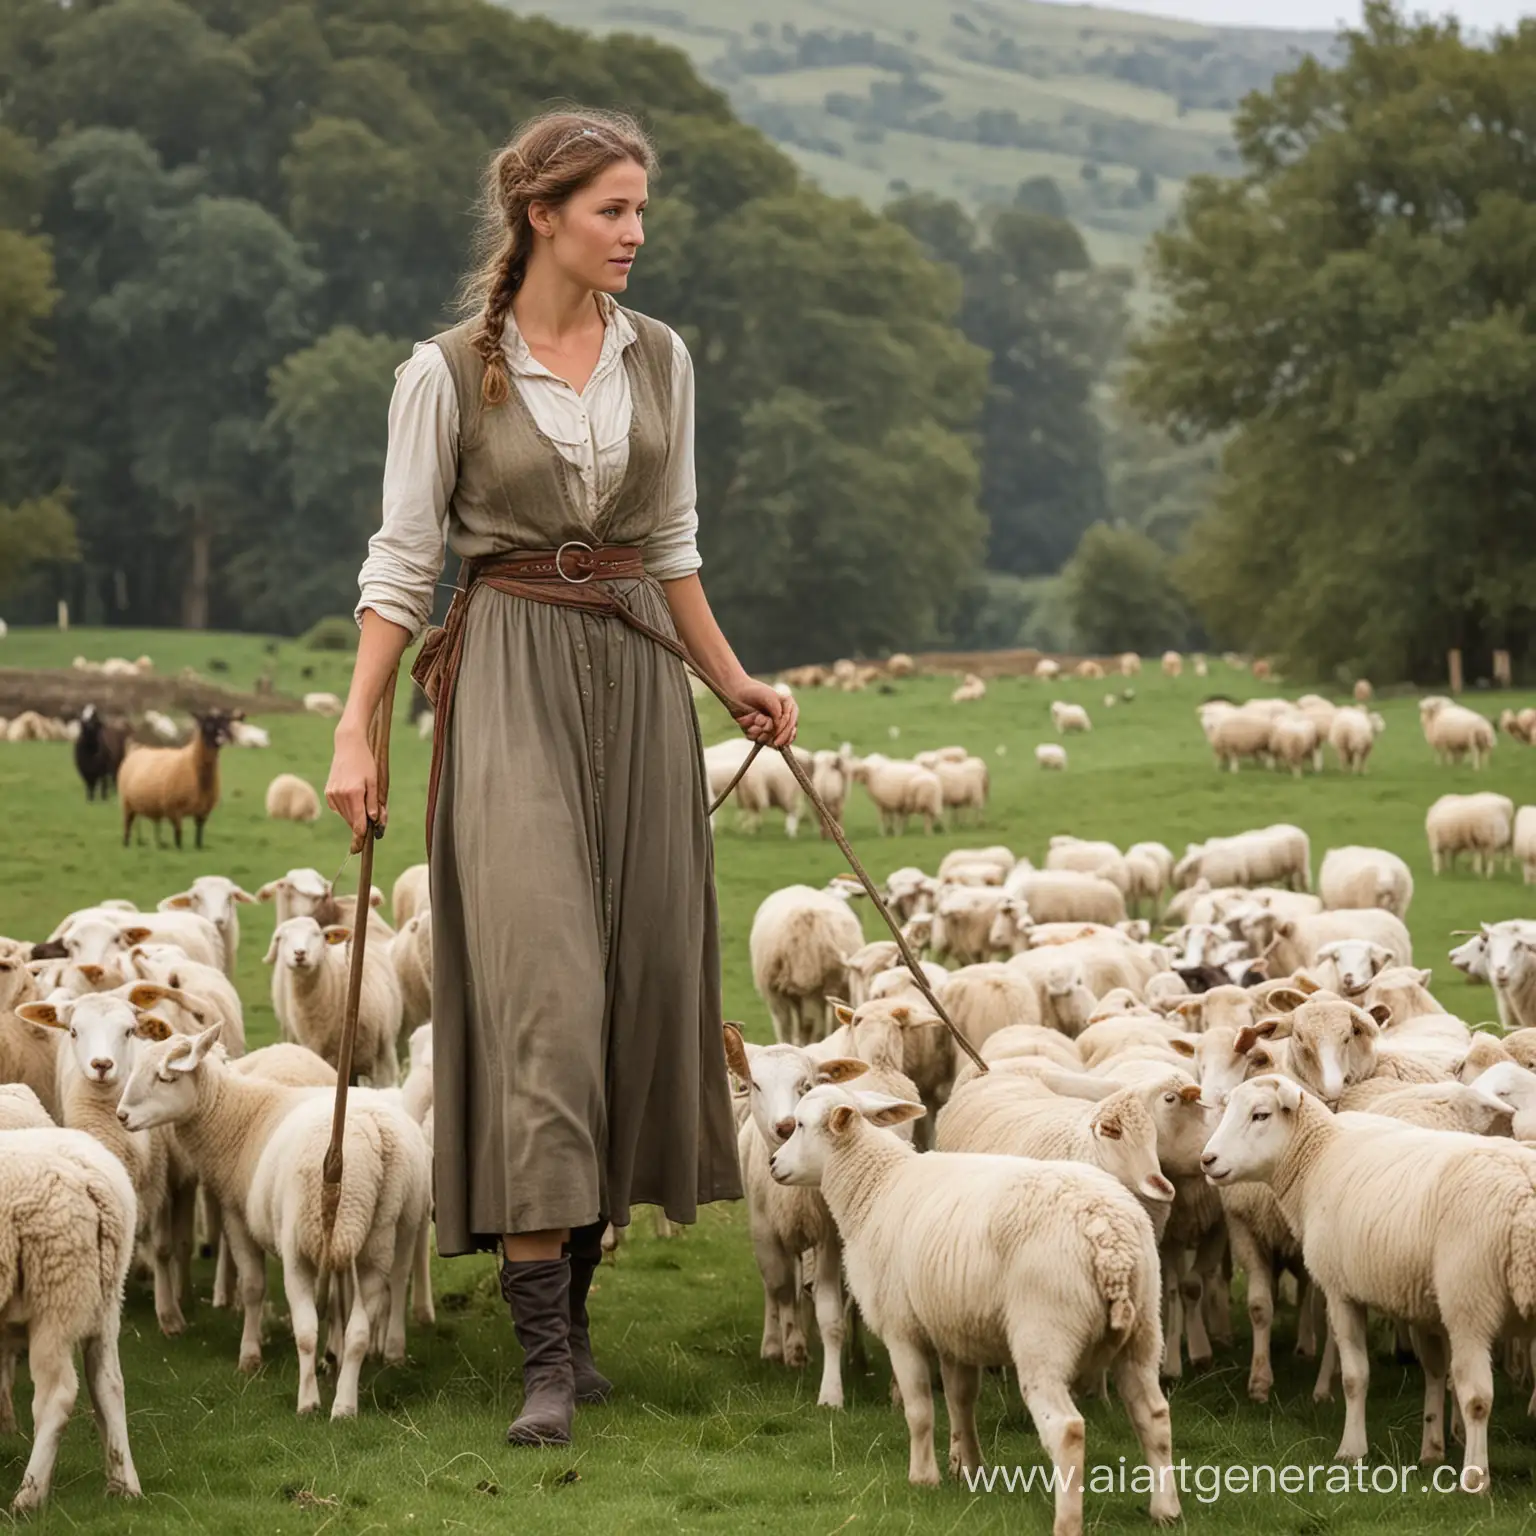 Serene-Shepherdess-with-Flock-of-Sheep-in-Countryside-Pasture